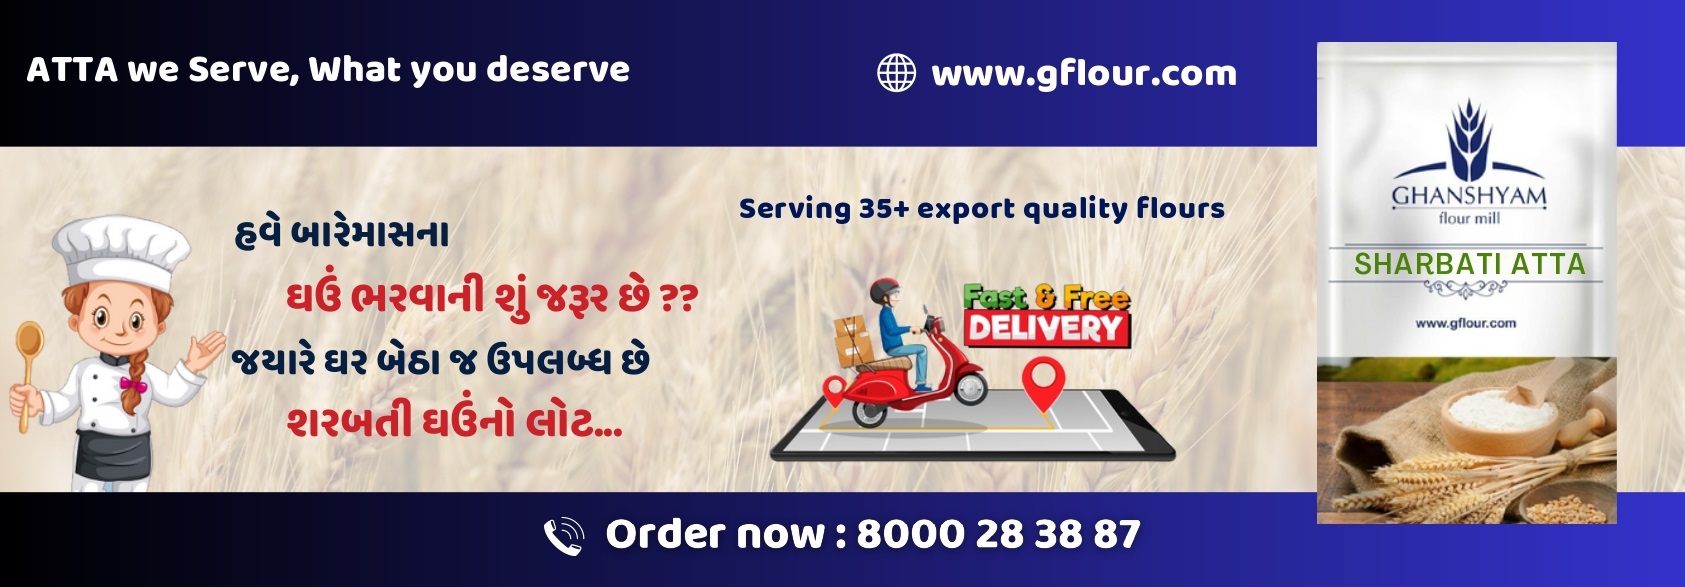 Free Home Delivery Adajan, Surat